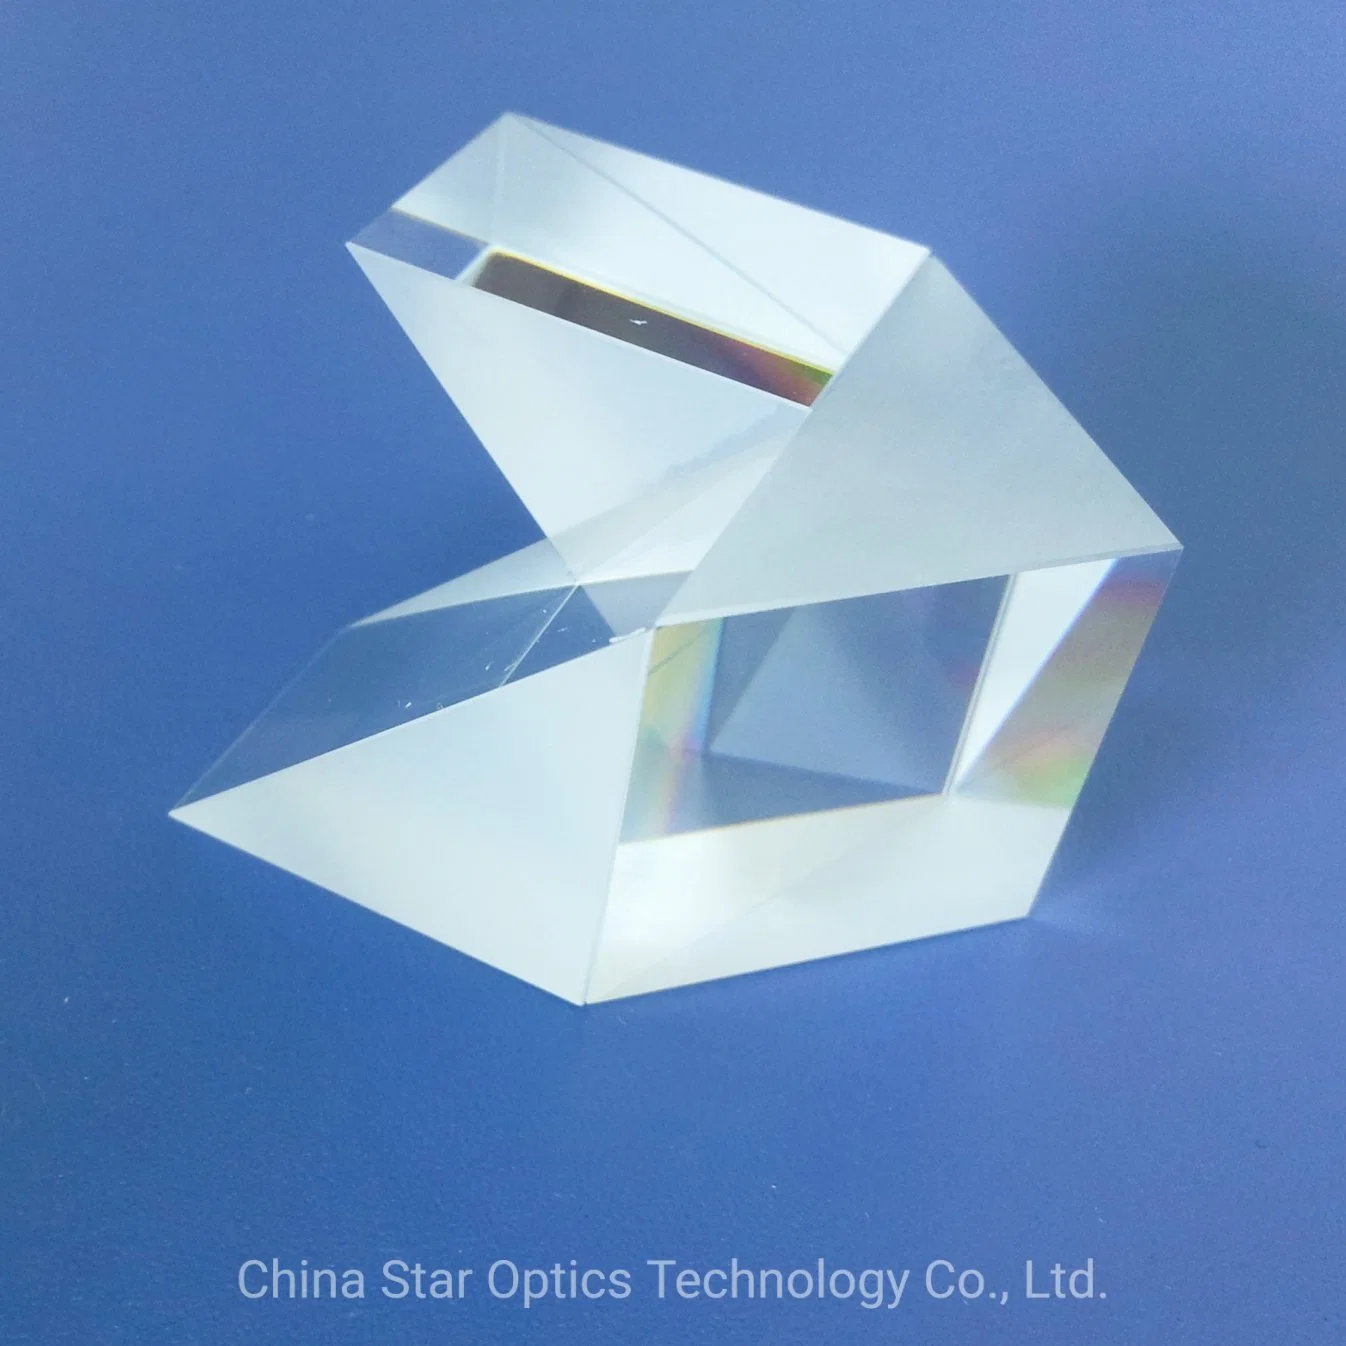 Optical Glass K9 Customized High-Precision Cementing Prism Collimating Prism